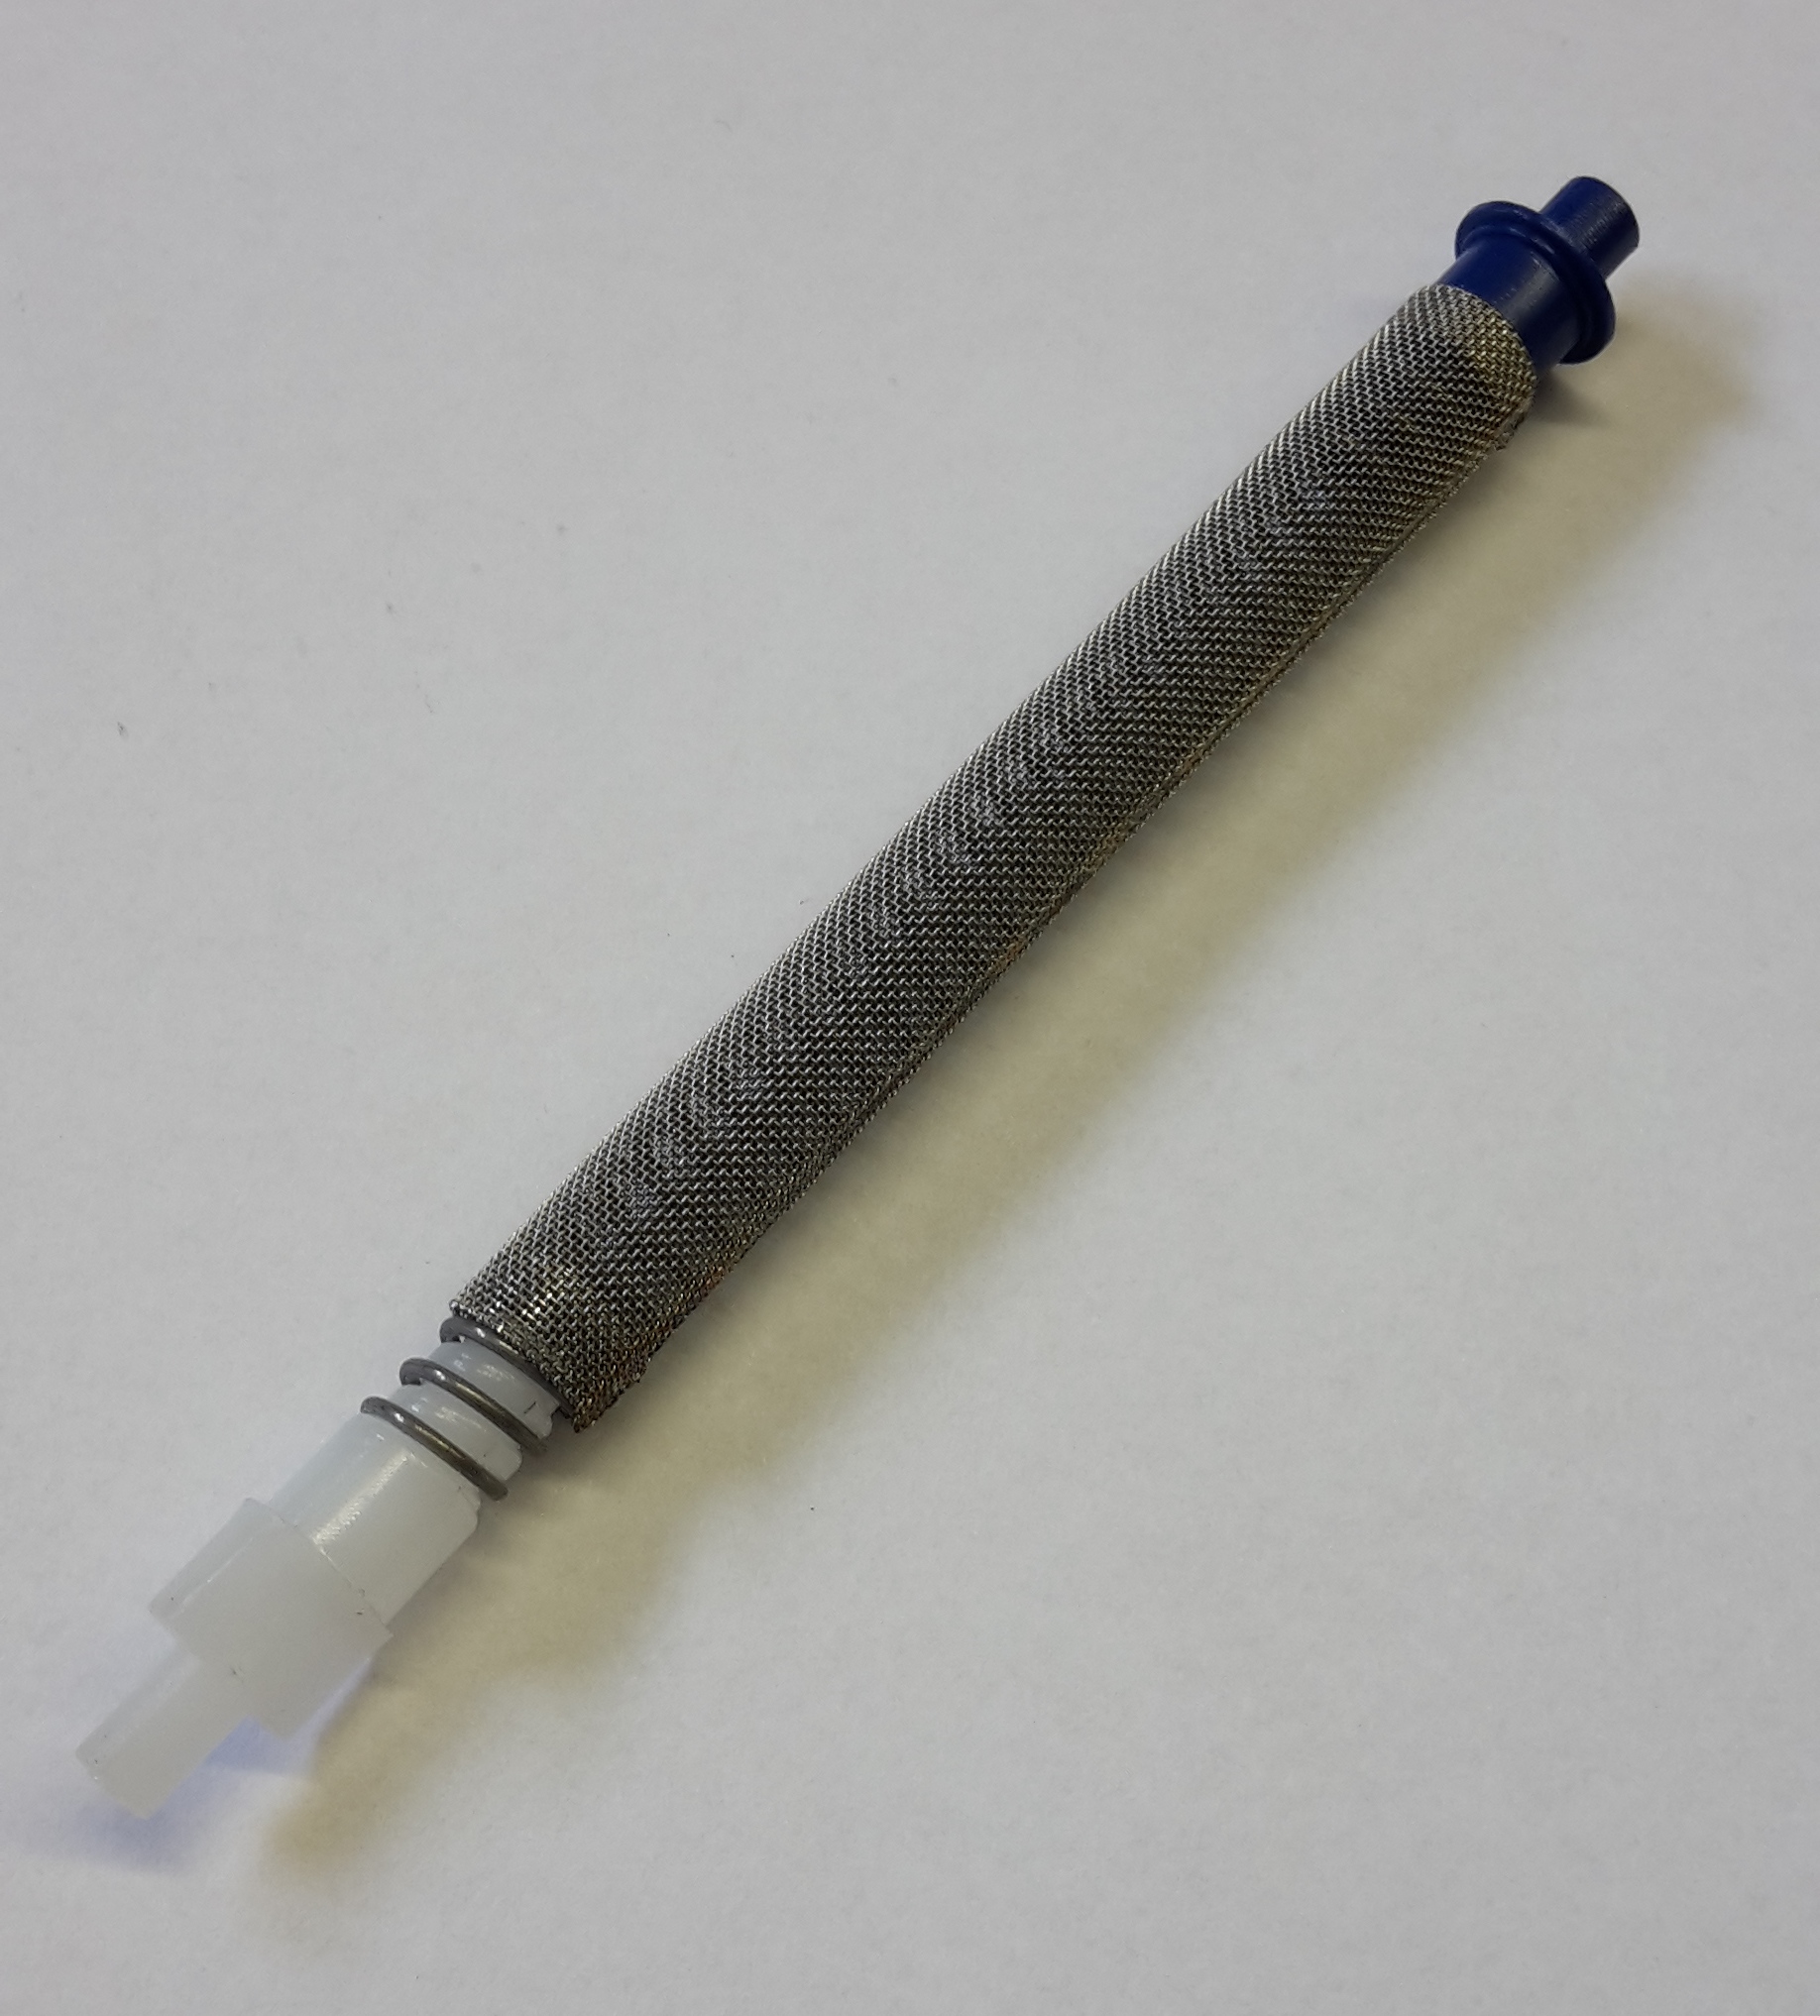 Pistolenfilter Einsteckfilter Easy Out passend Graco 50 mesh